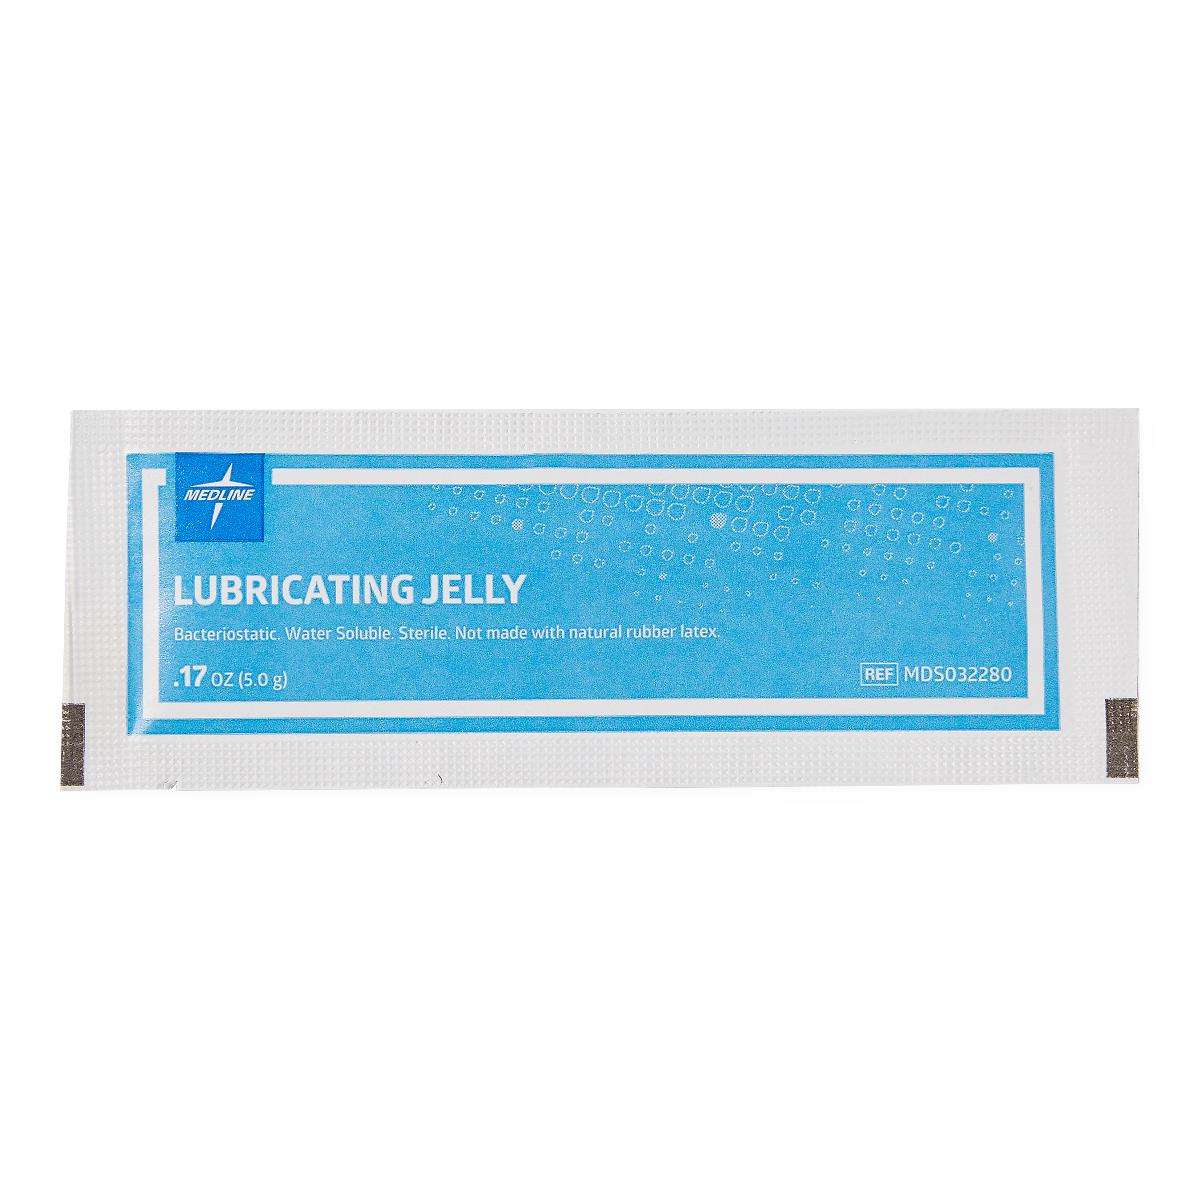 Lubricating Jelly - Packet